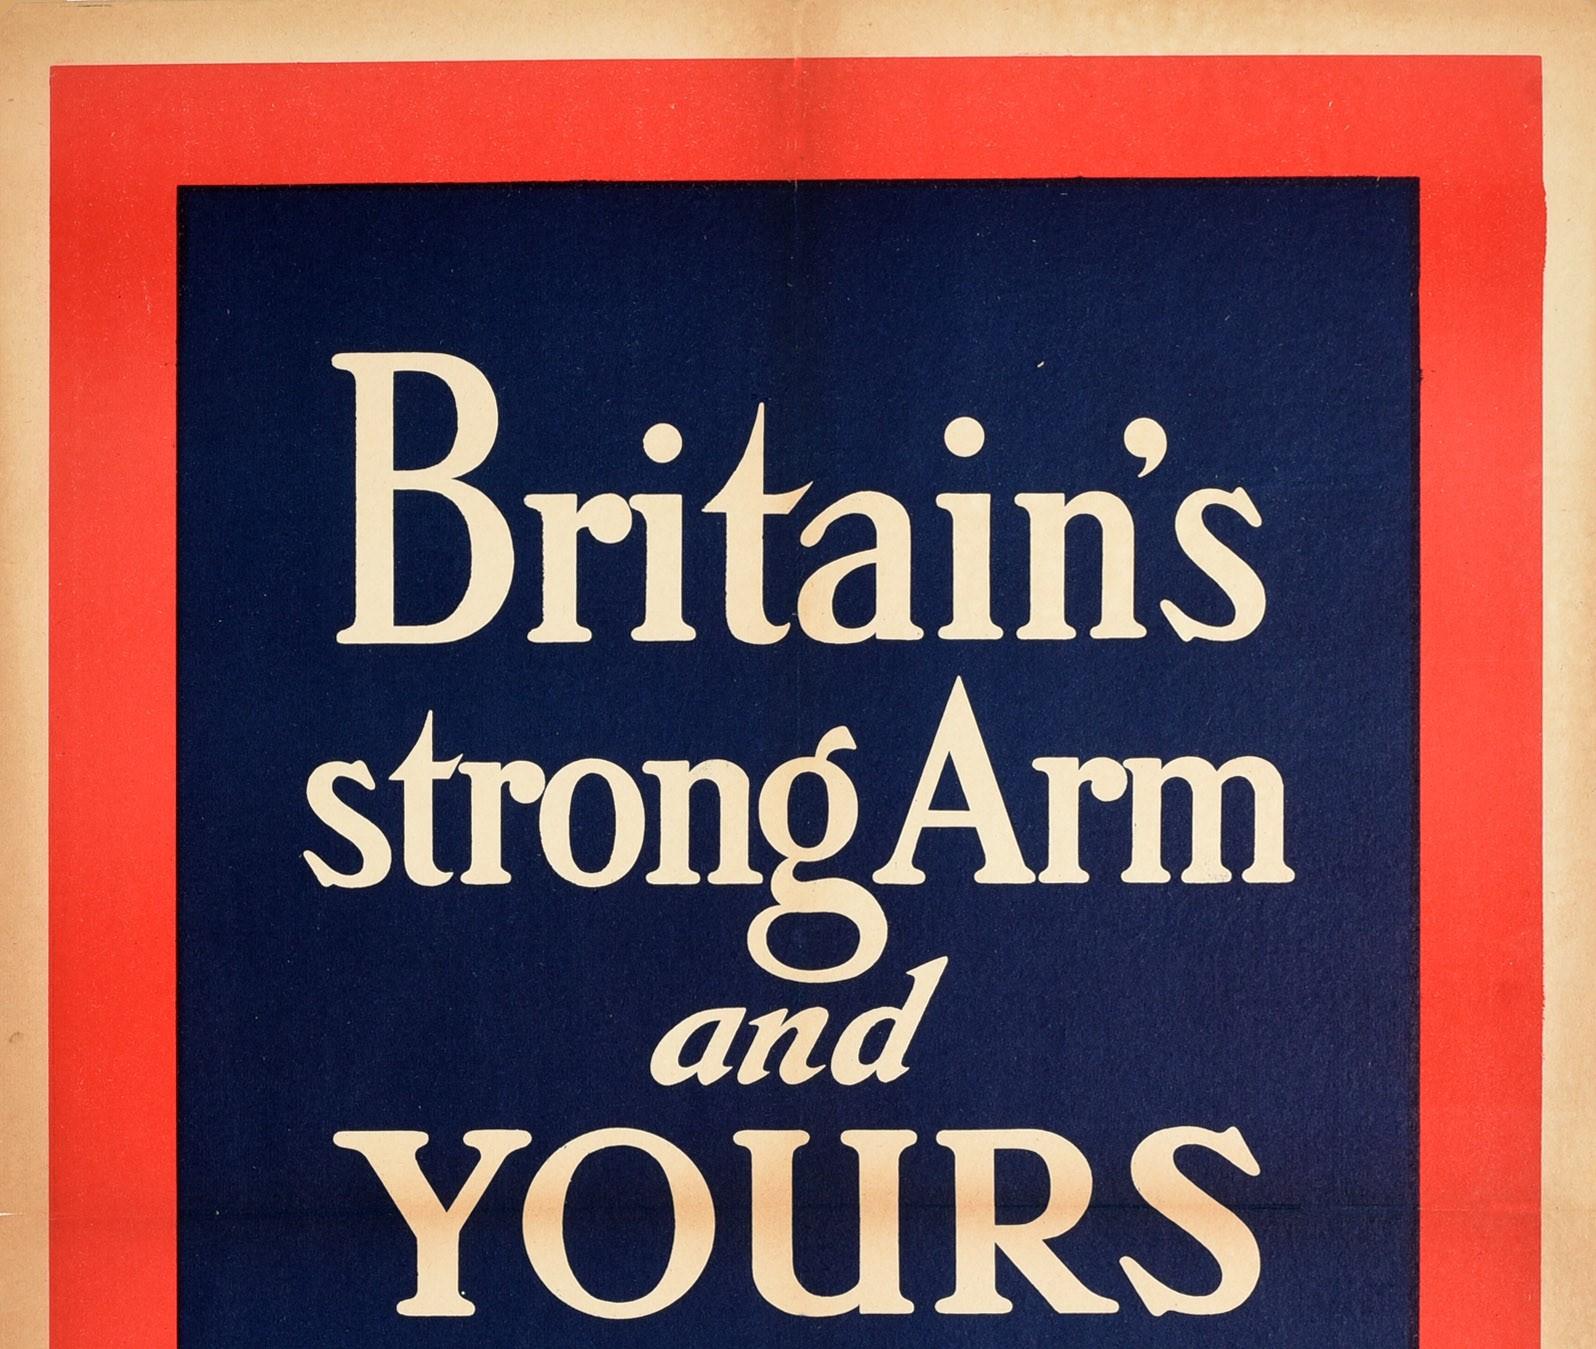 Original Antique Poster Britain's Strong Arm Enlist Now WWI Military Recruitment - Print by Unknown